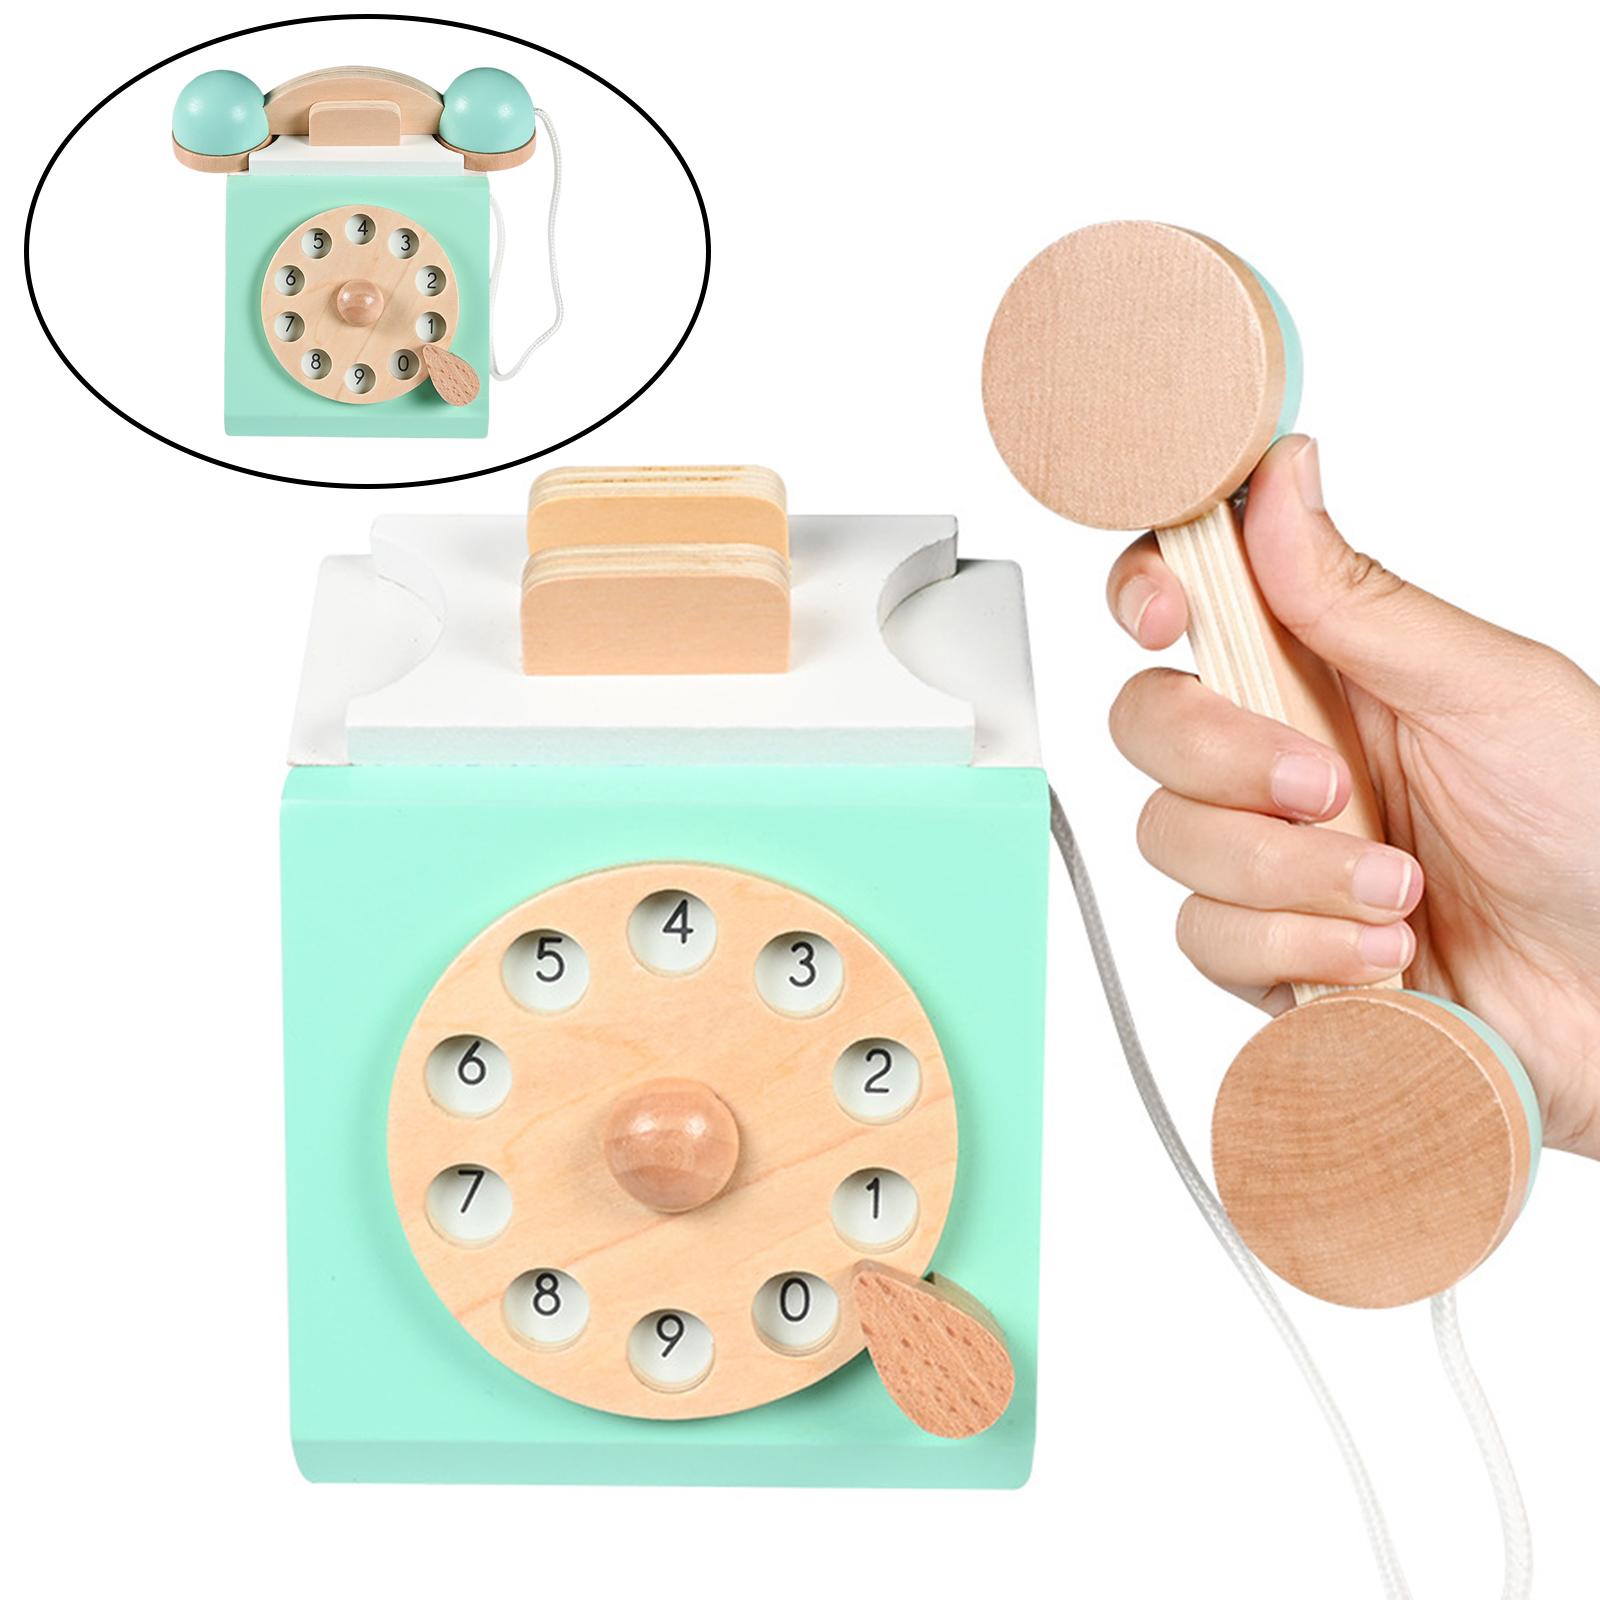 Retro Simulation Phone Playset Wooden Toys Role Play Educational